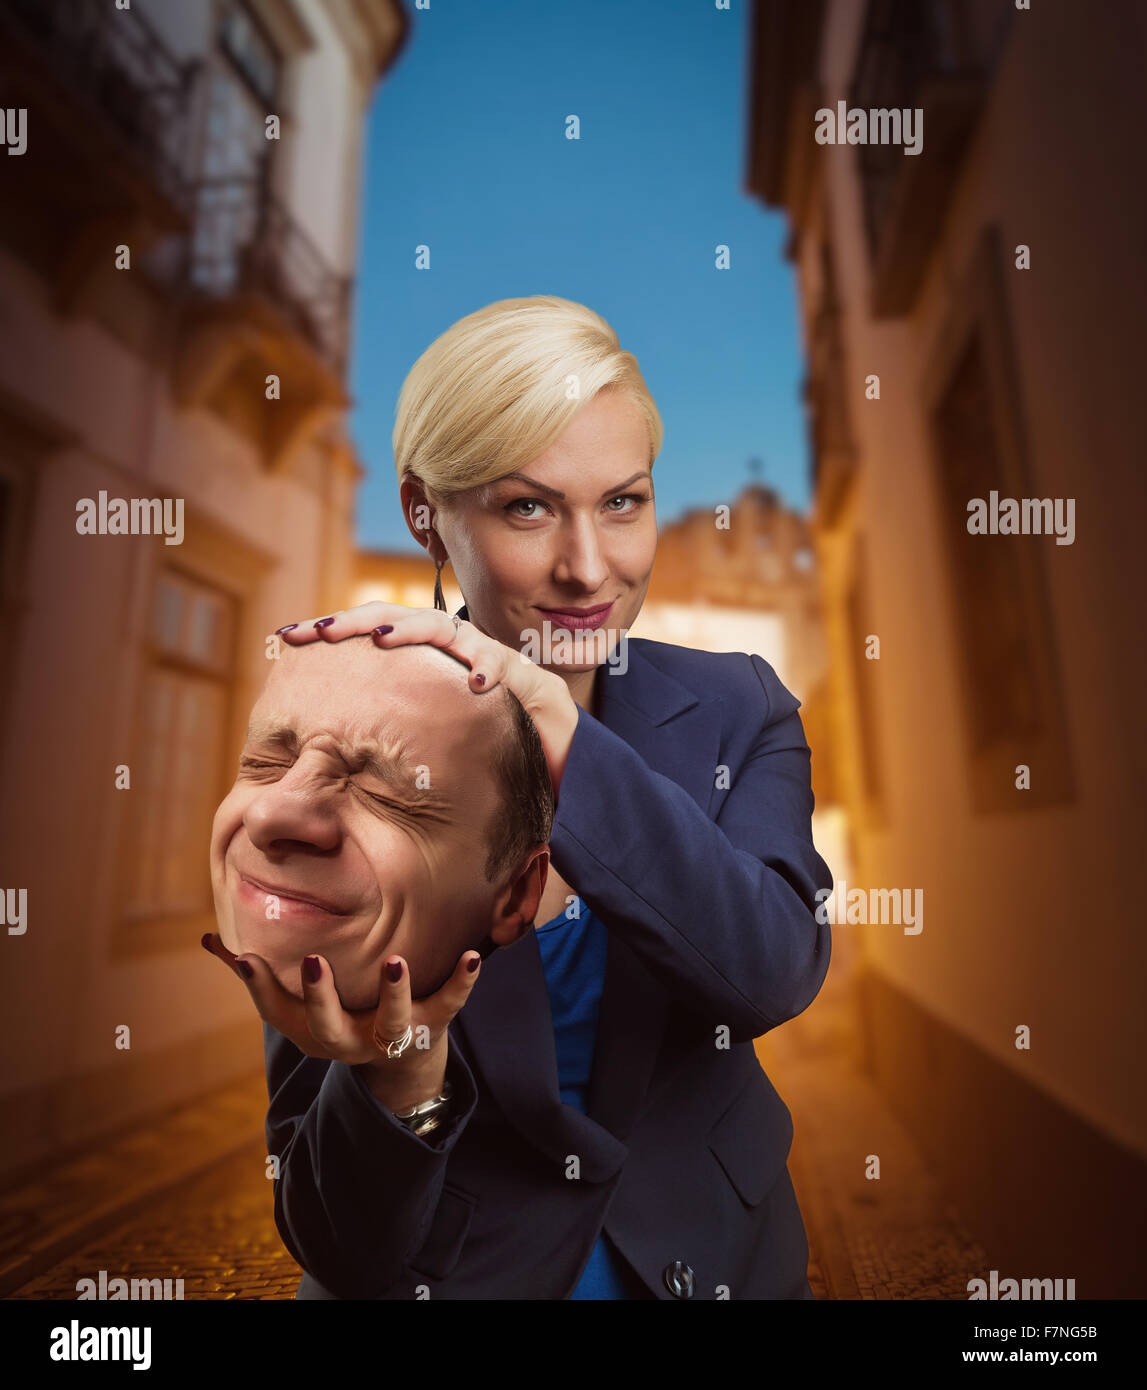 Woman with man's head in her hand Stock Photo